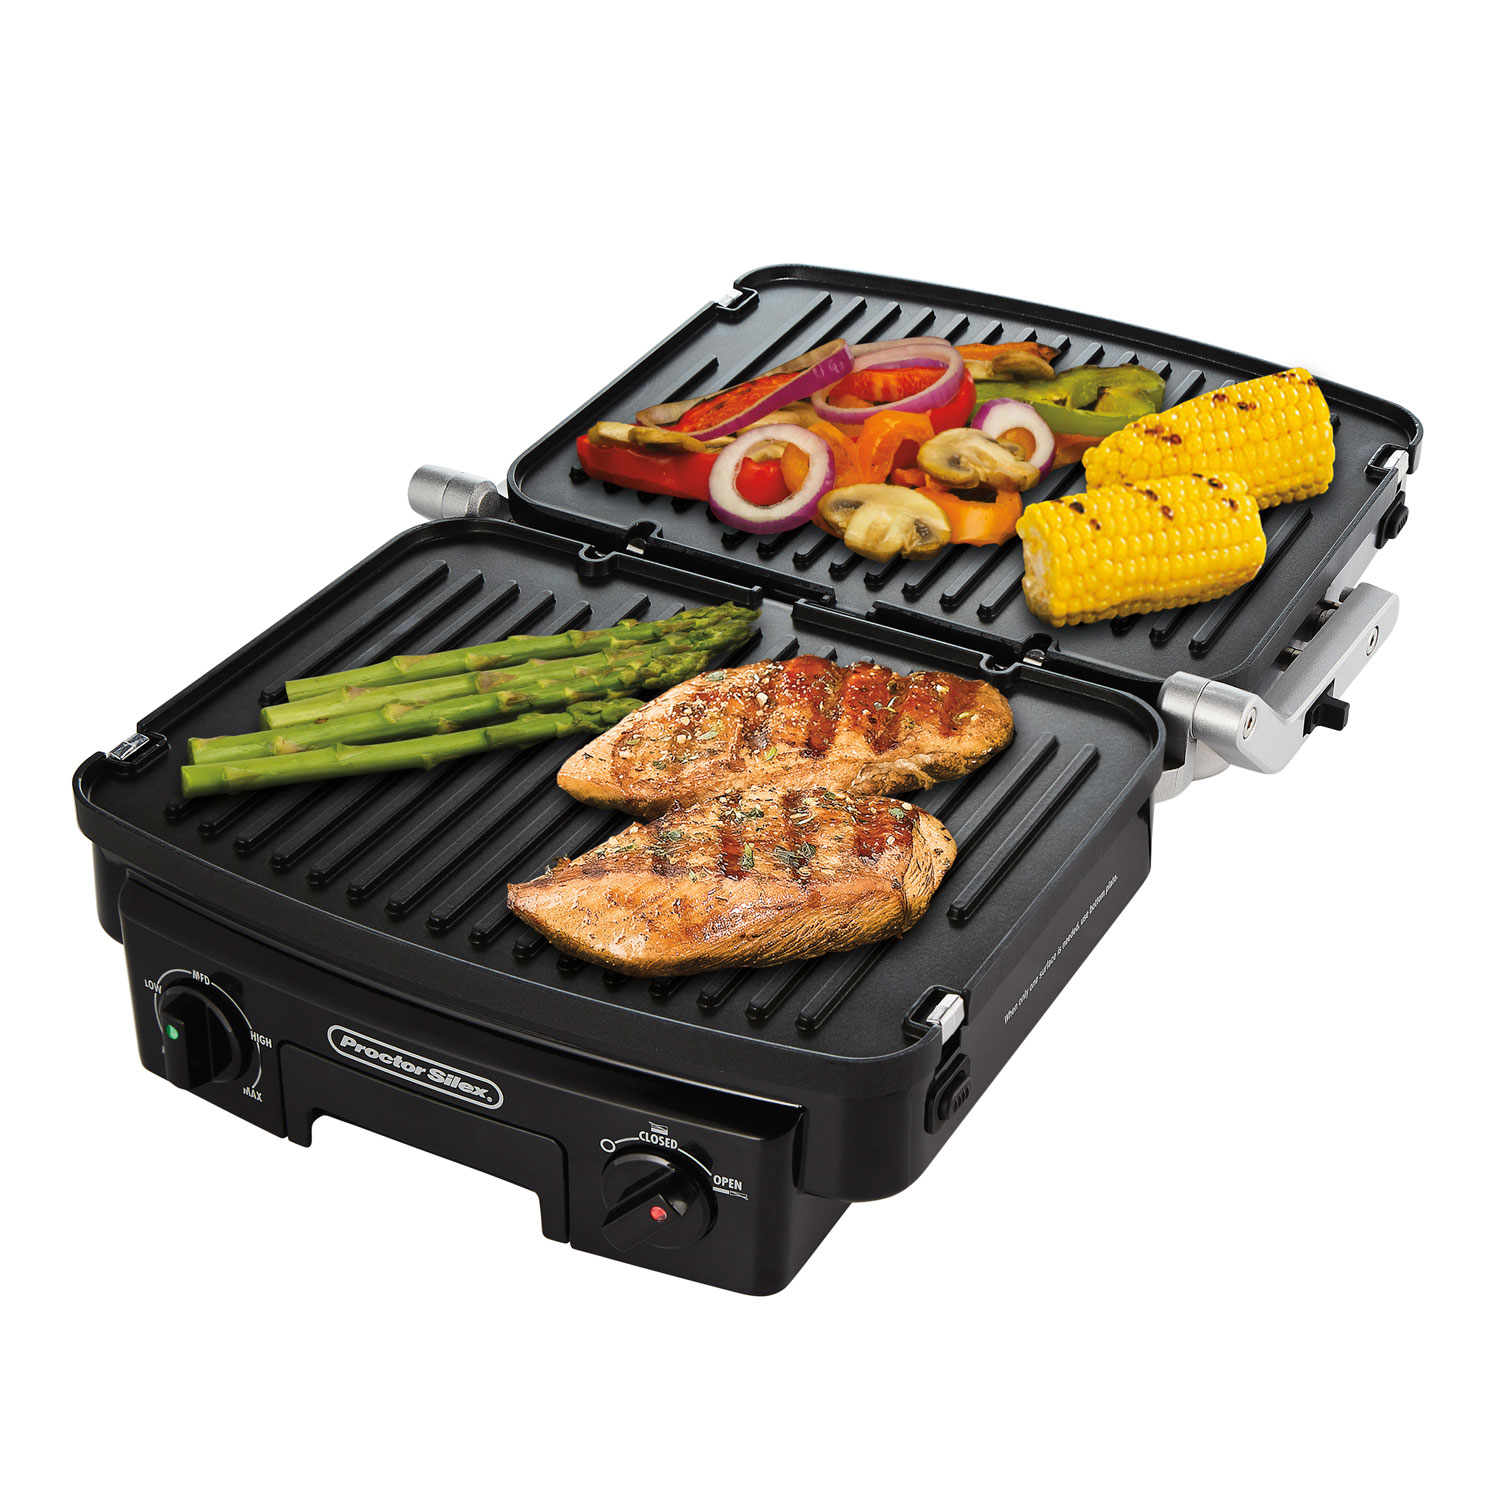 Proctor Silex Electric Grill and Panini Press & Reviews